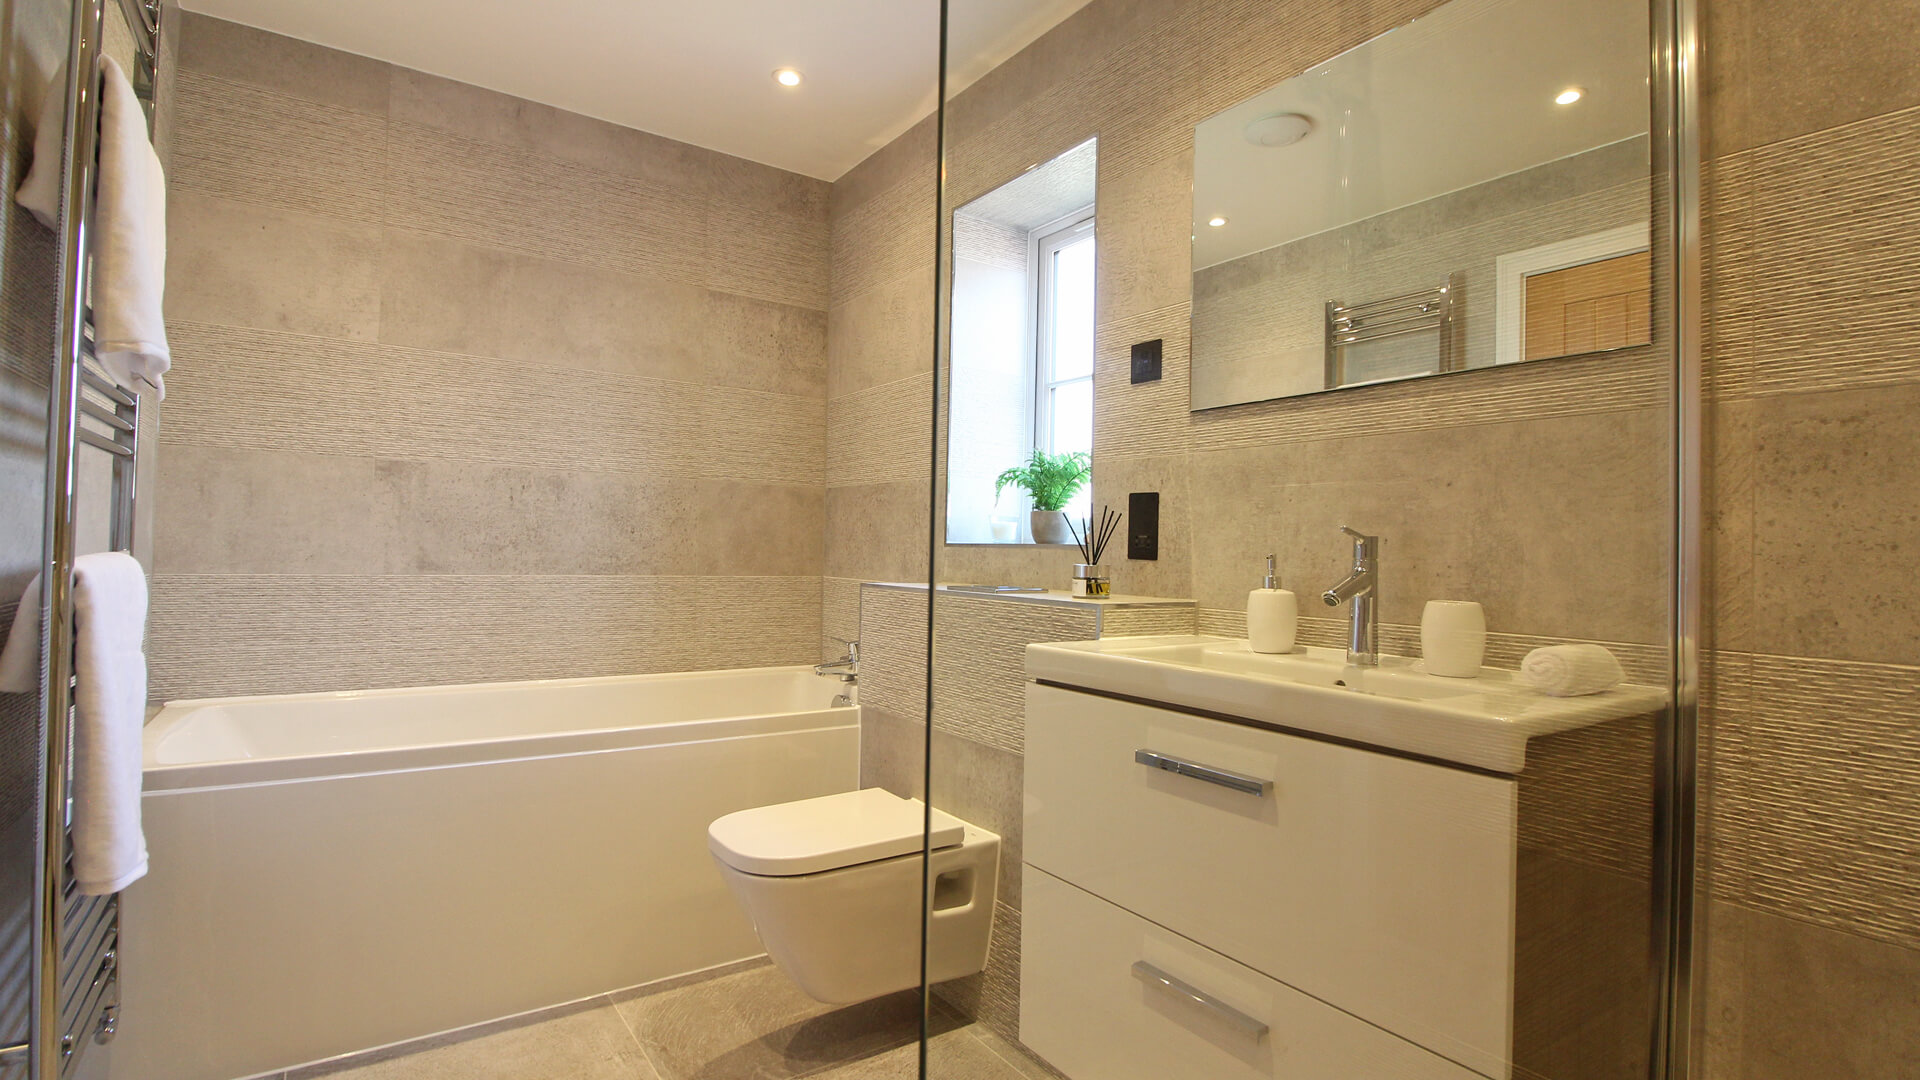 Fitted bathroom suite at Weavers park.